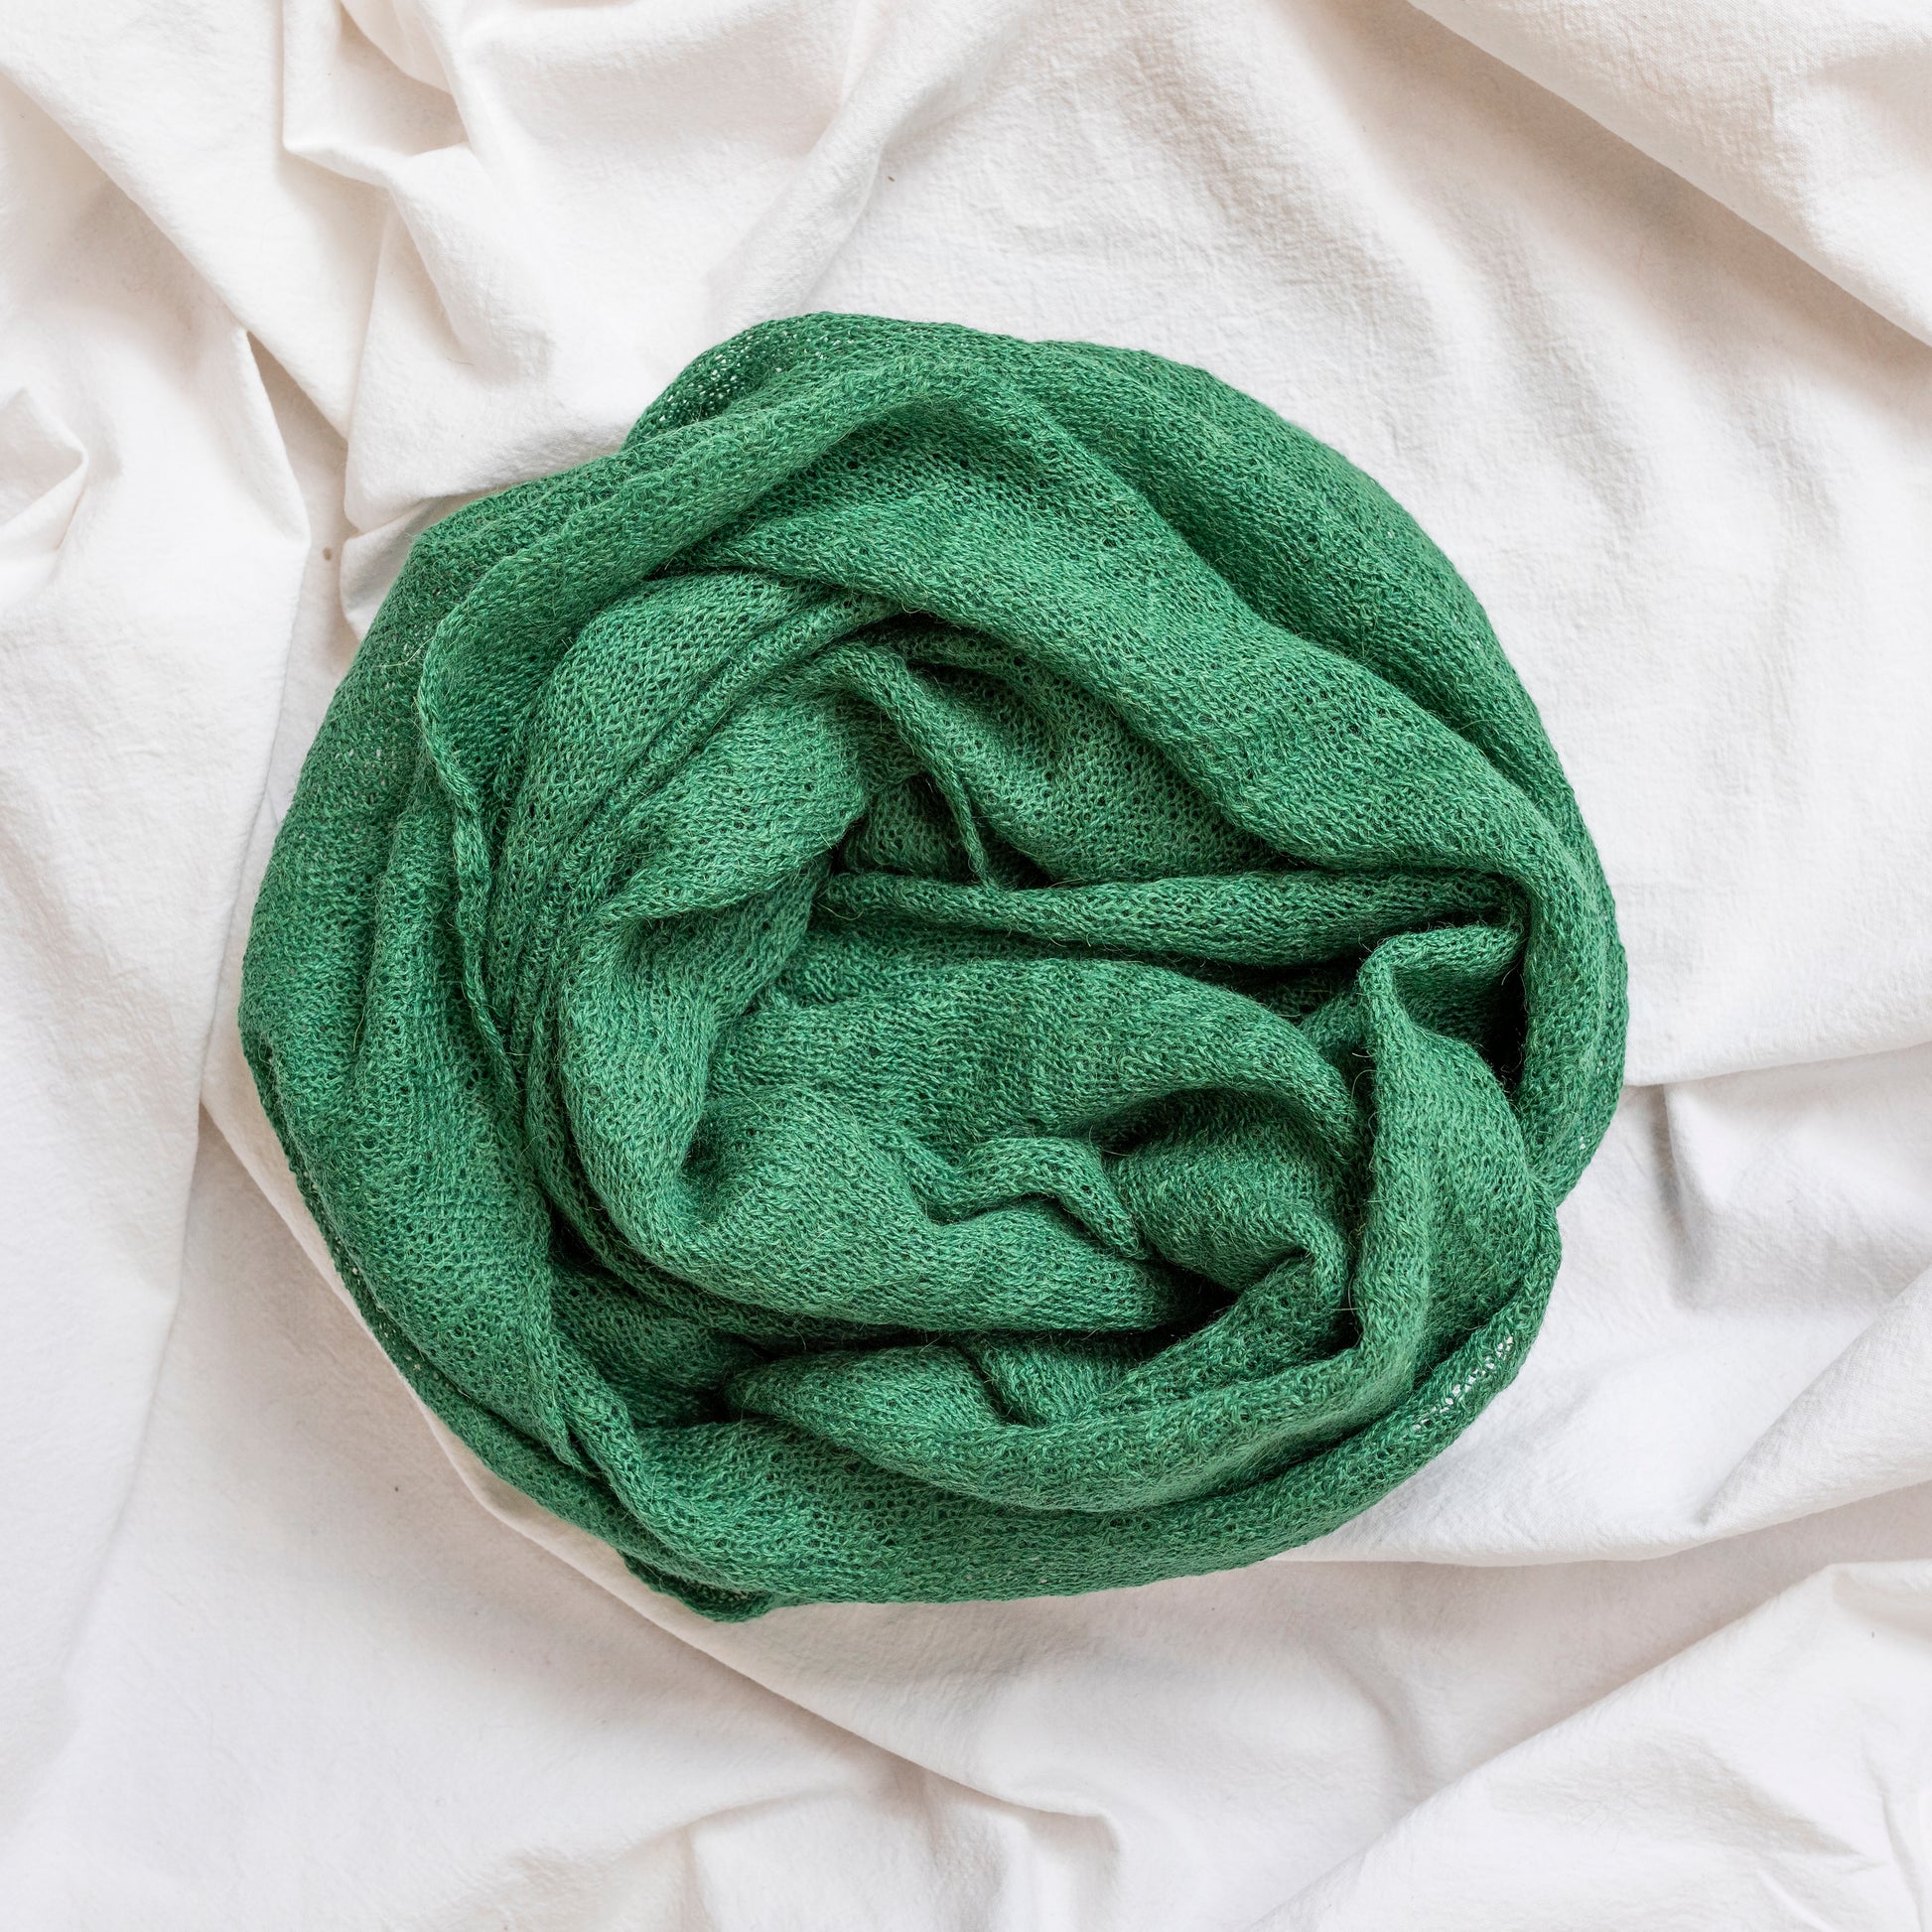 Forest green coloured lightweight and delicately woven scarf. Hand-made by artisans.